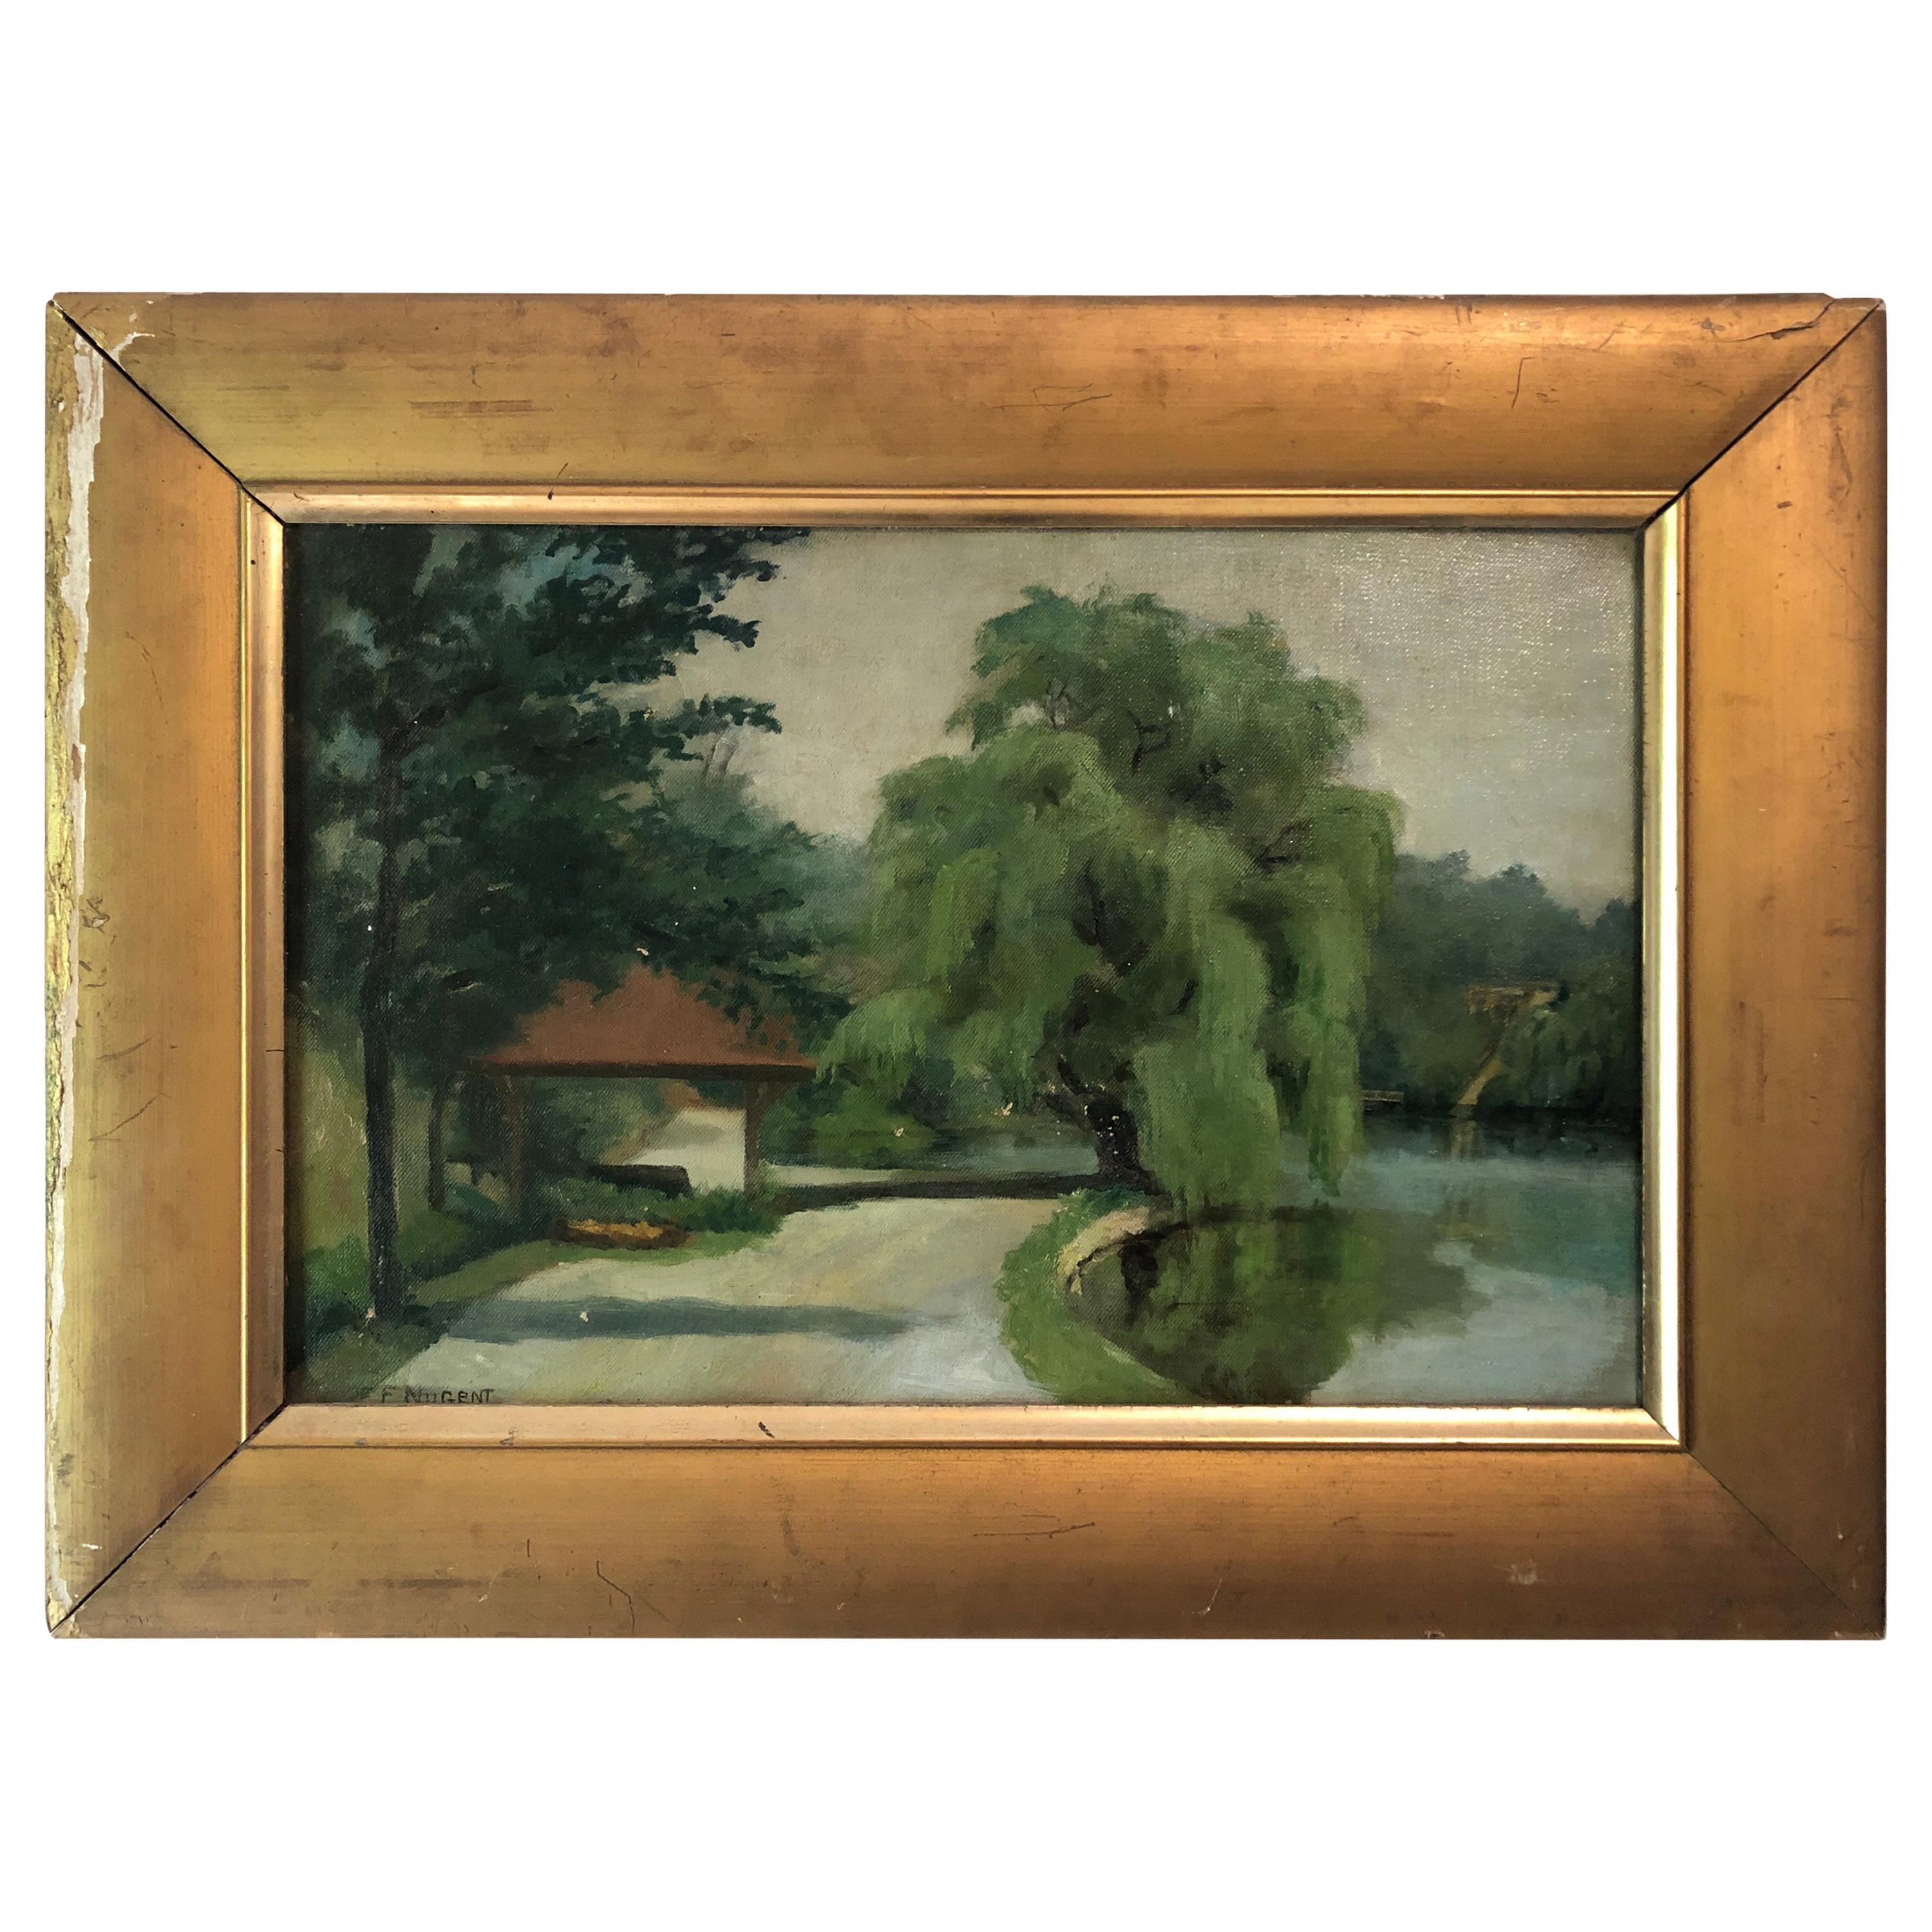 Landscape with Willow Tree by Frances Roberts Nugent, circa 1930